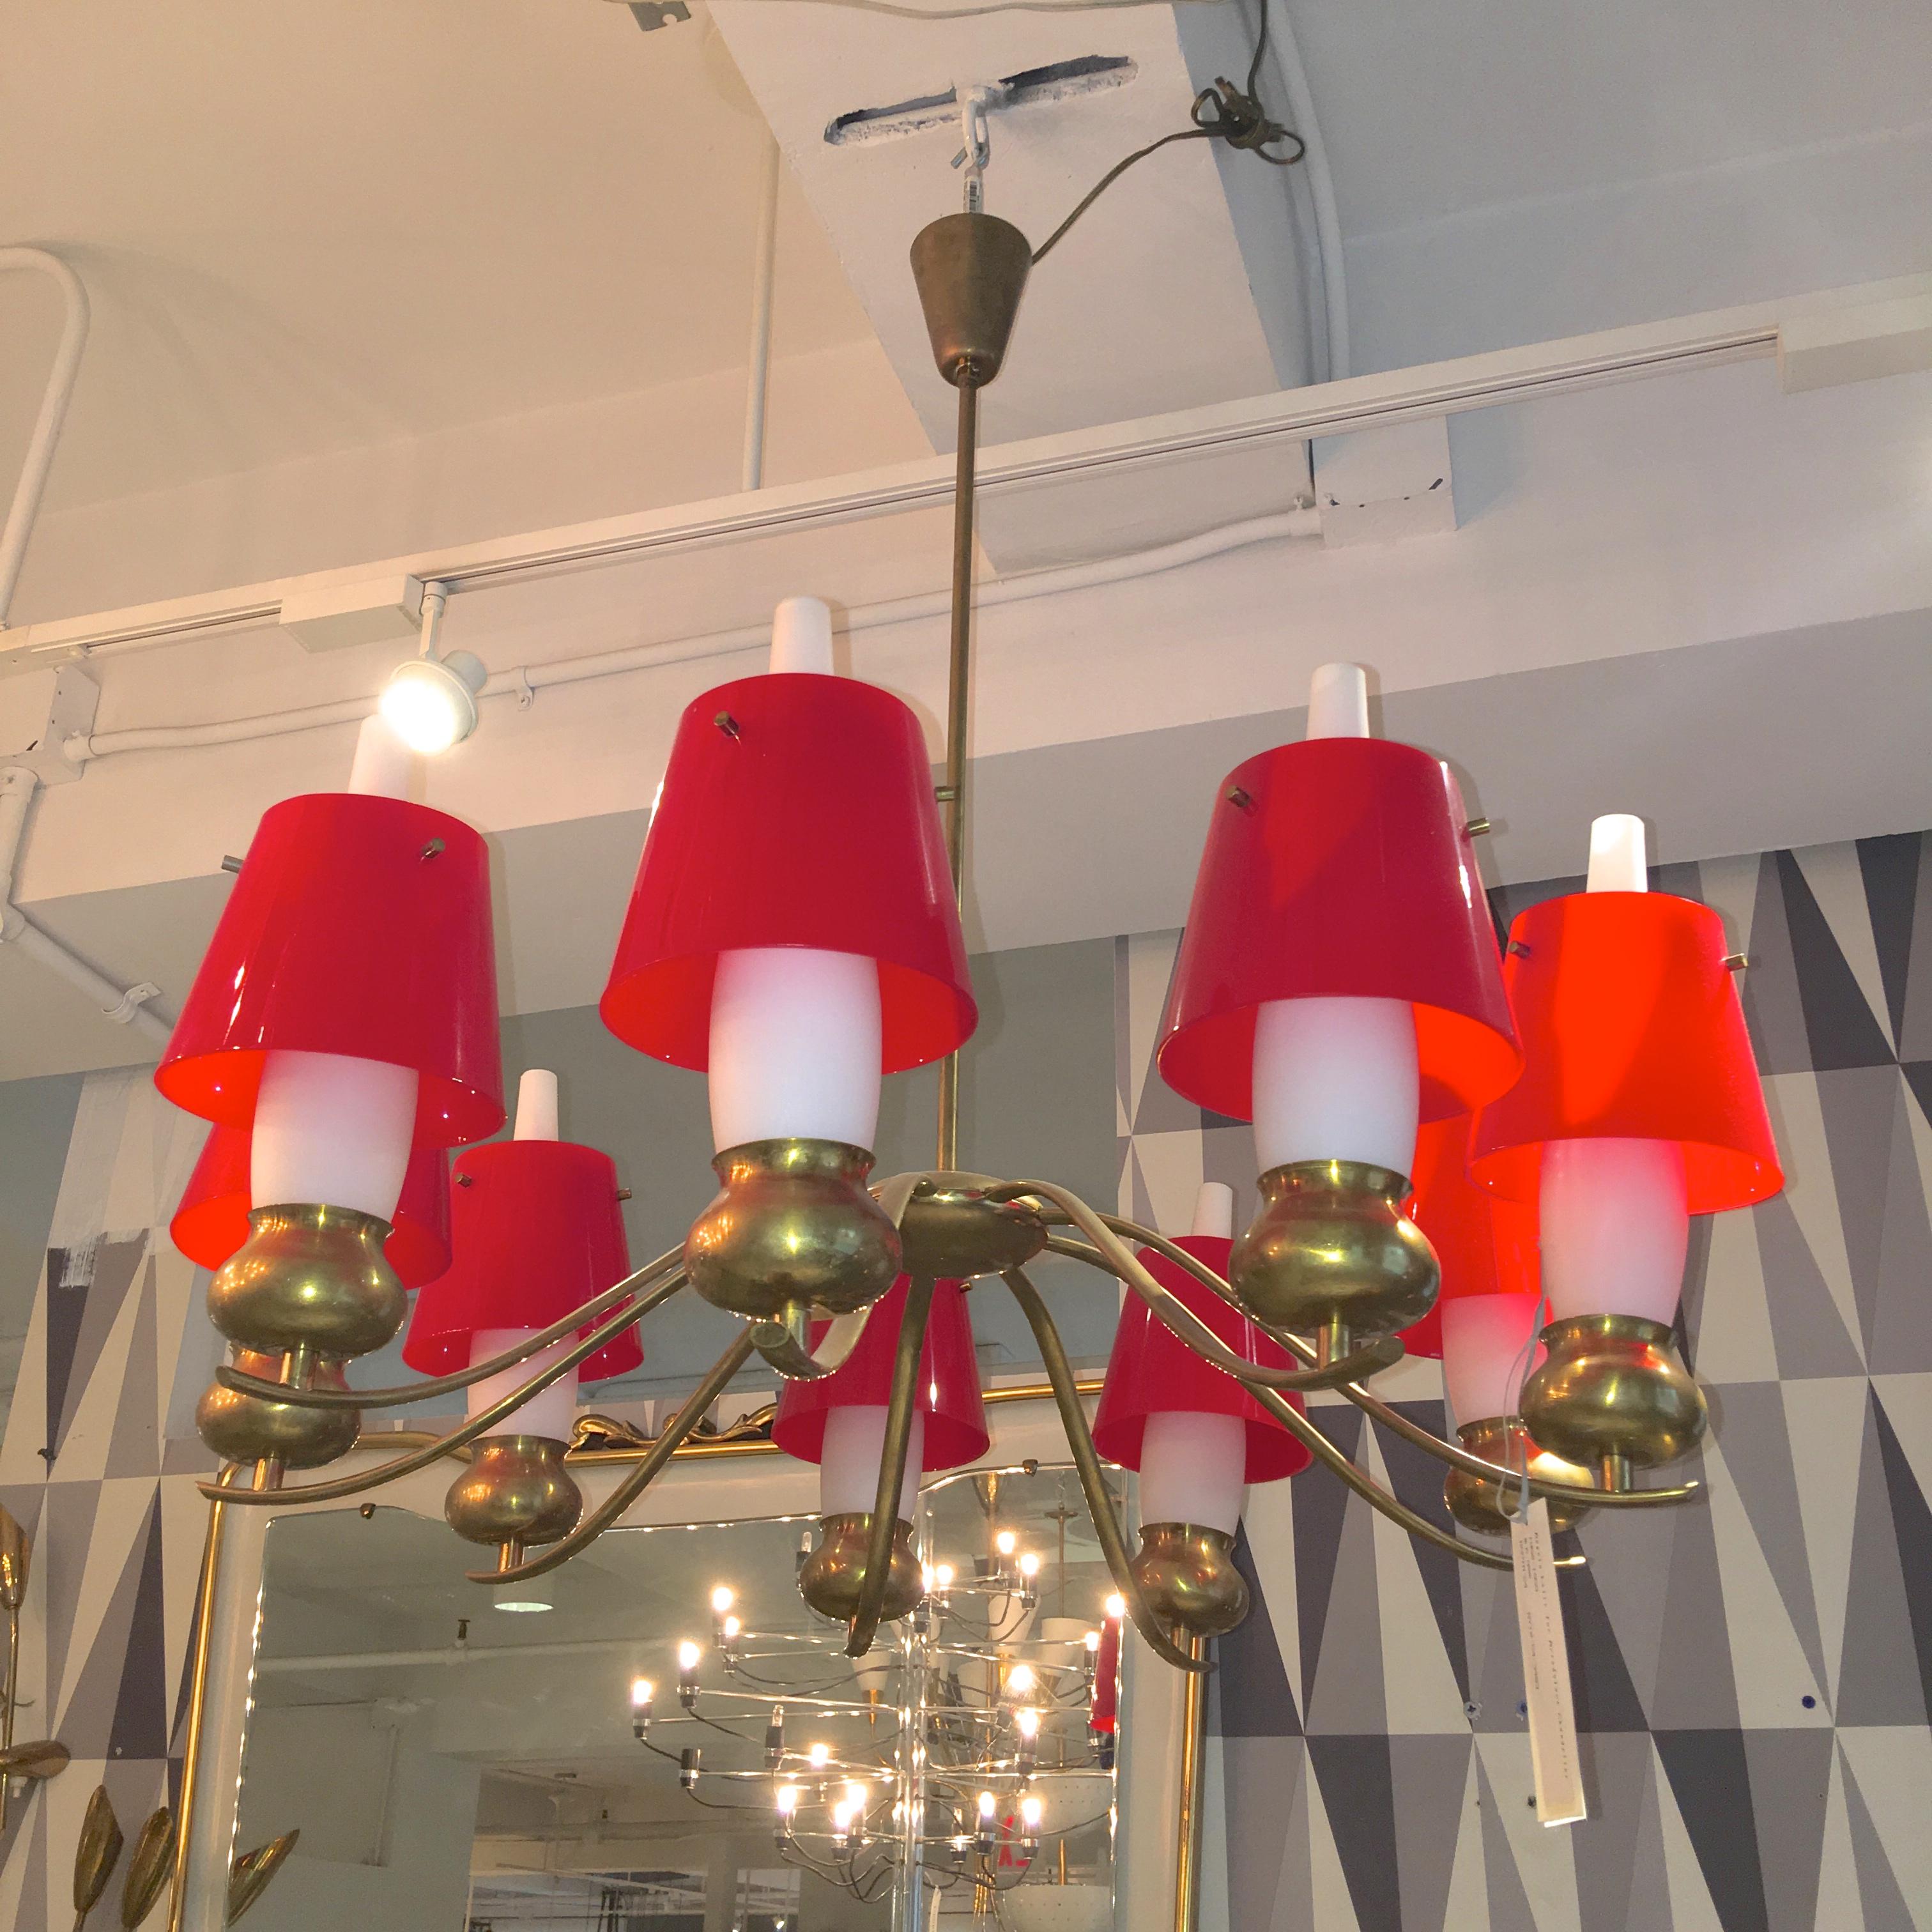 Ddesigned by Angelo Lelli and produced by Arredoluce Monza in 1959. Nine scrolled brass arms with brass bun shaped lamp holders with original white opaline glass chimney shades, further embellished by original flared plexi acrylic shades which slip